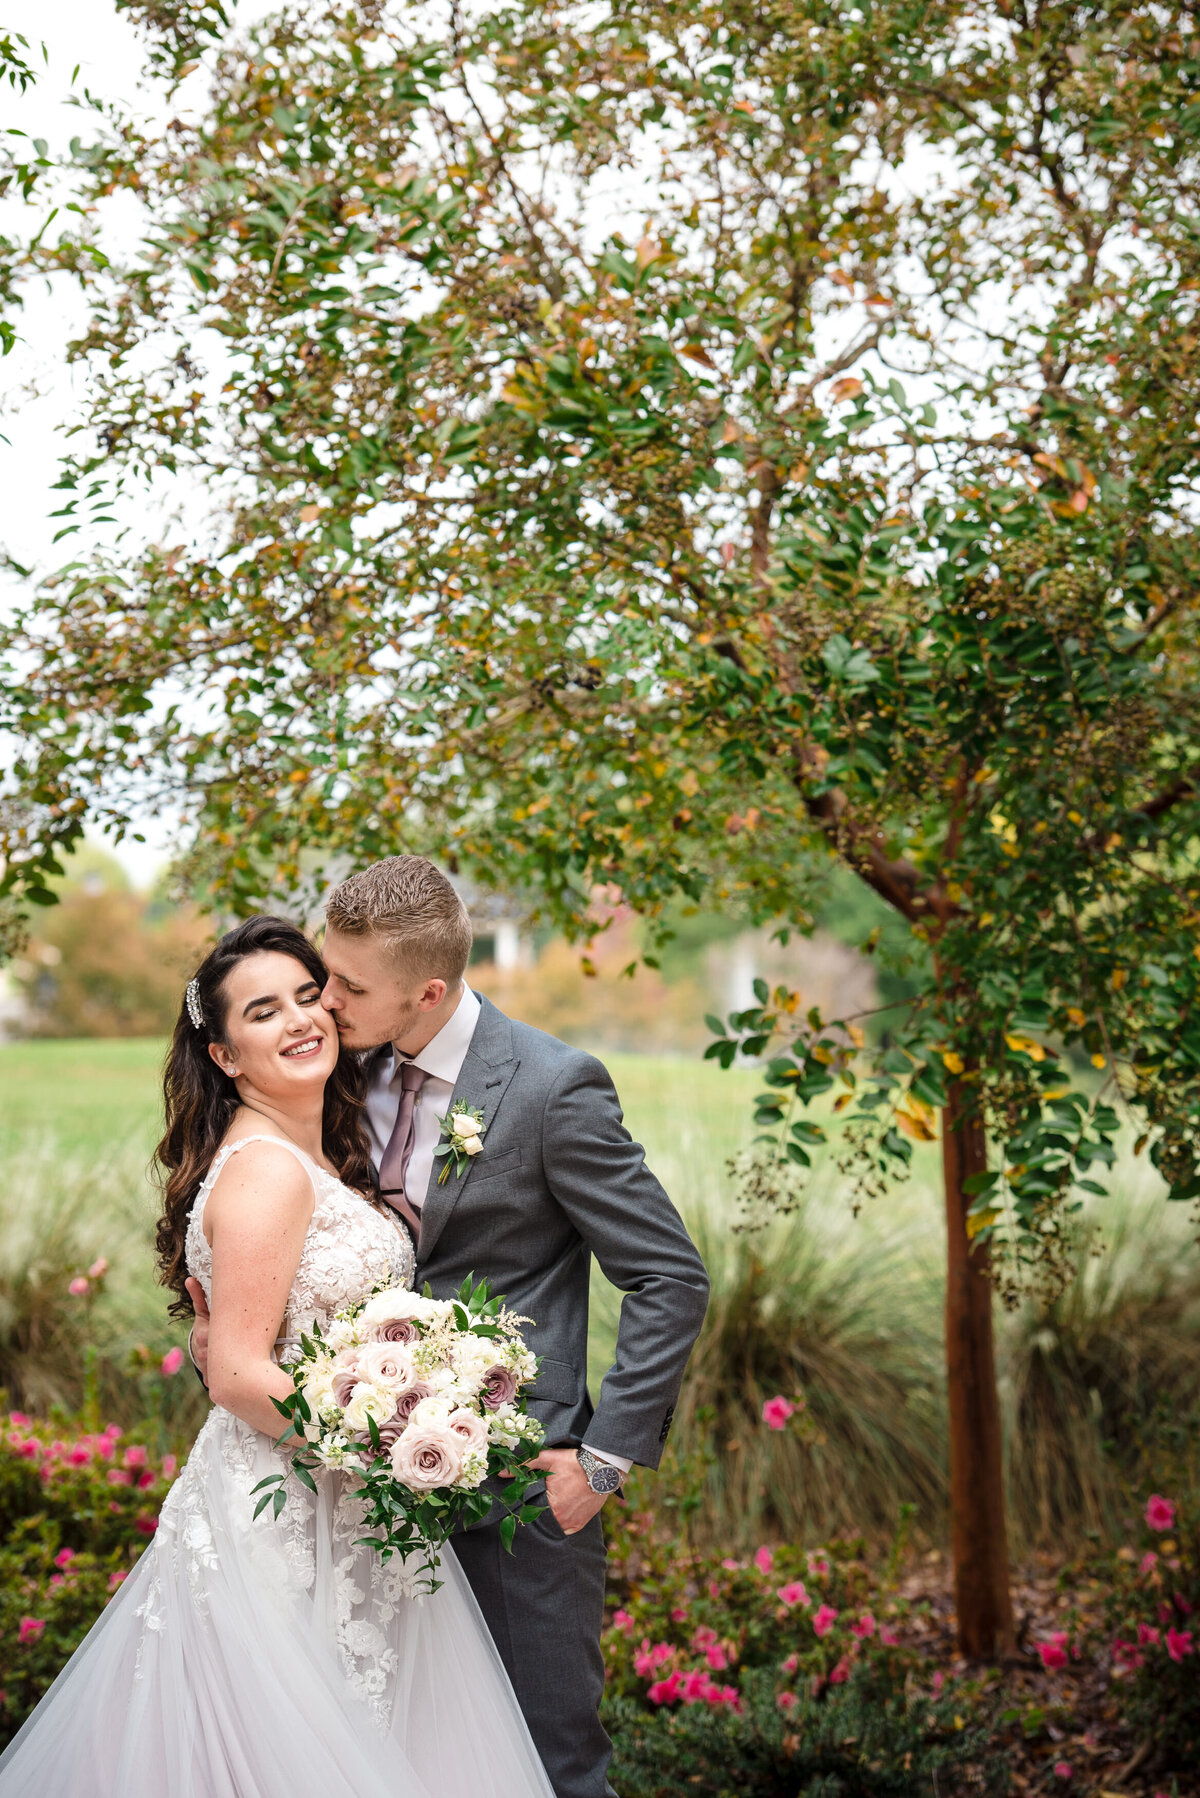 Russian groom kissing bride's cheek outside in the garden of at the Ballantyne Hotel by Charlotte wedding photographers DeLong Photography